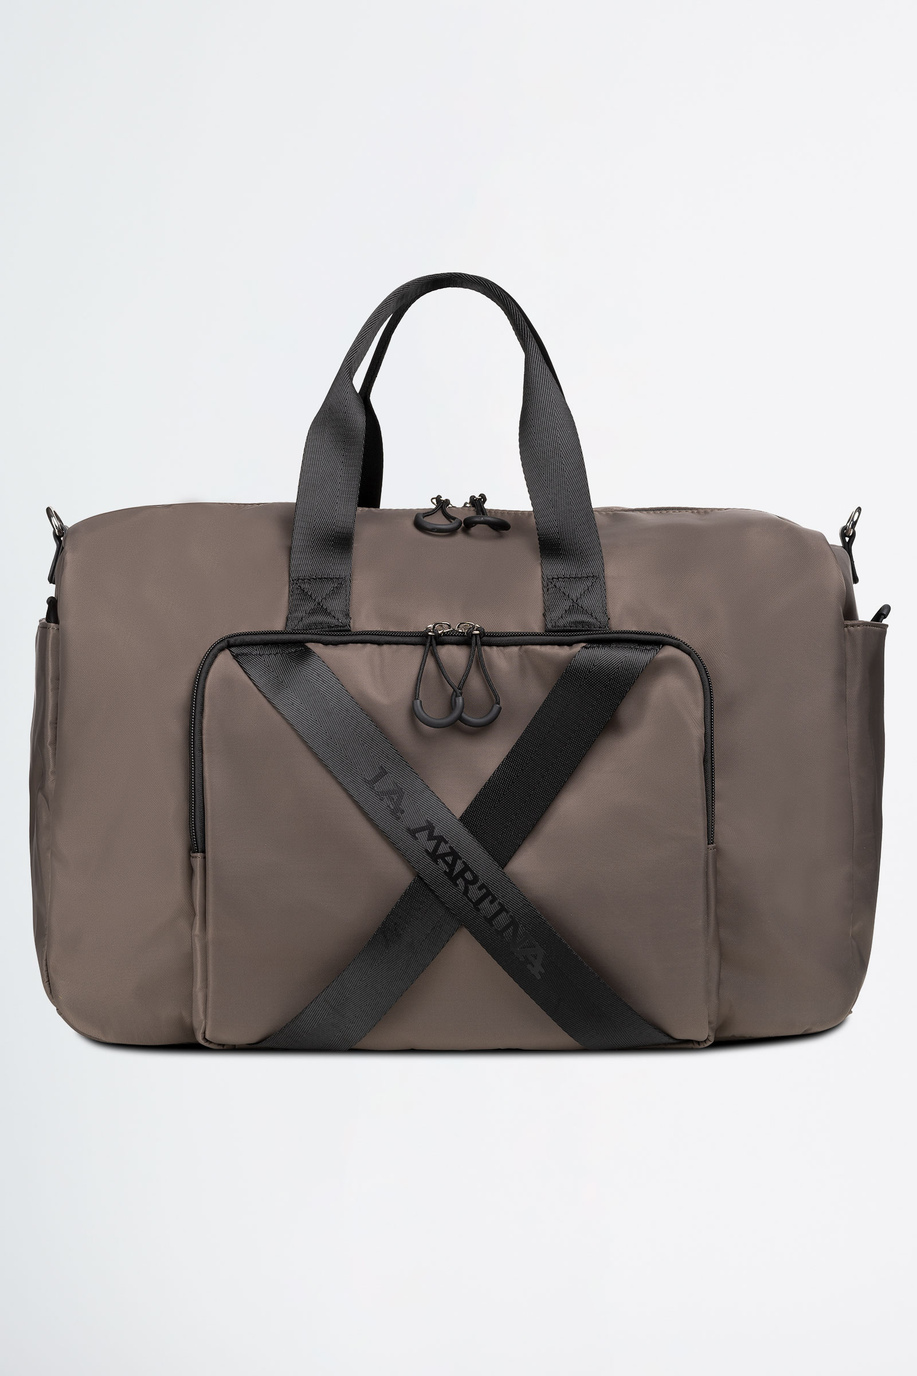 Duffle bag two handles in synthetic fabric - Bags | La Martina - Official Online Shop